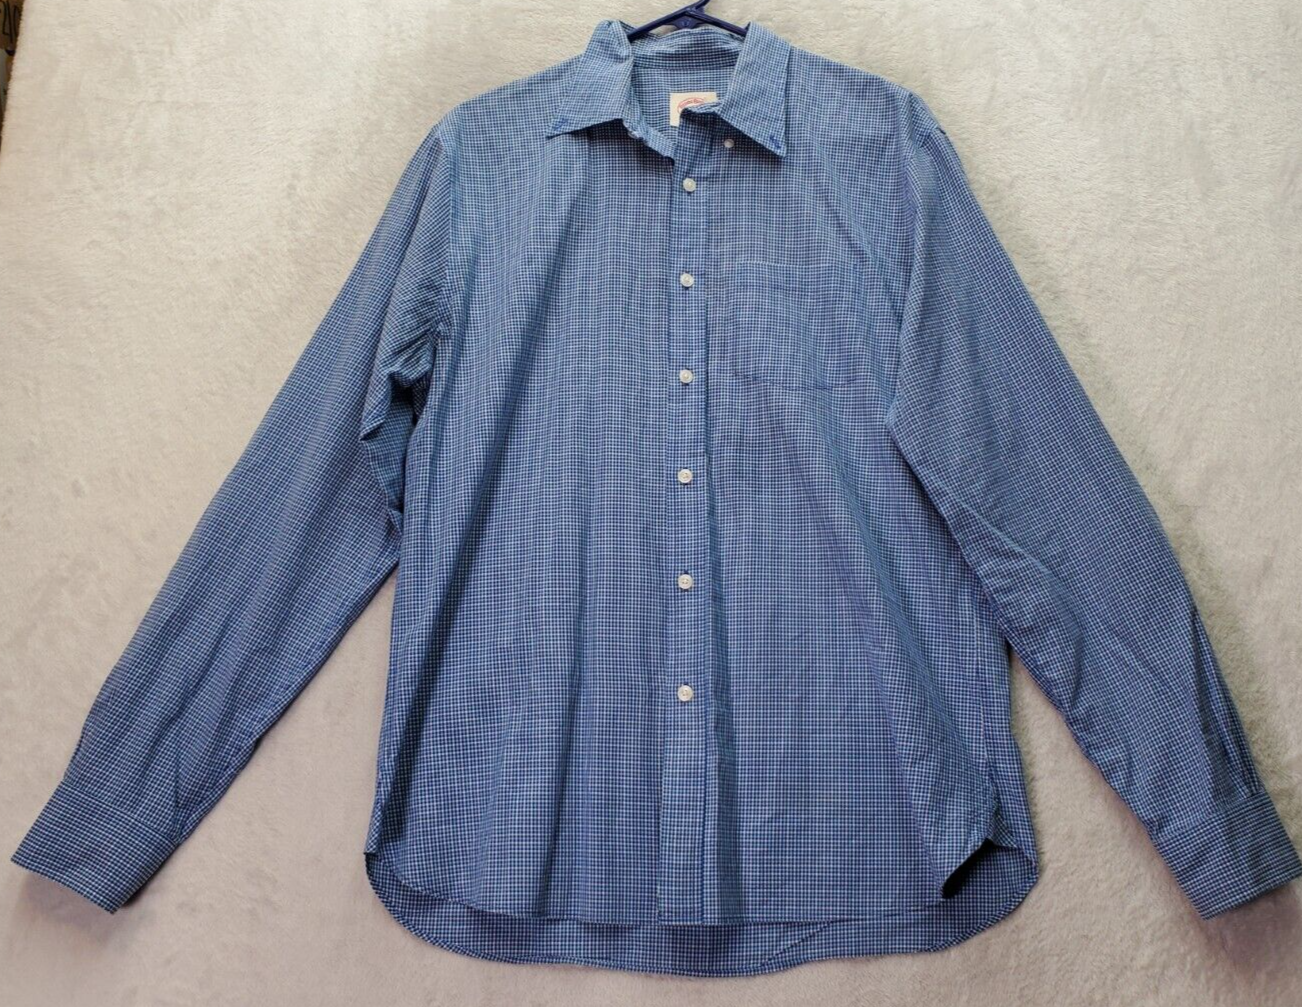 Primary image for Brook Brothers Shirt Men Large Blue Gingham Check Long Sleeve Collar Button Down